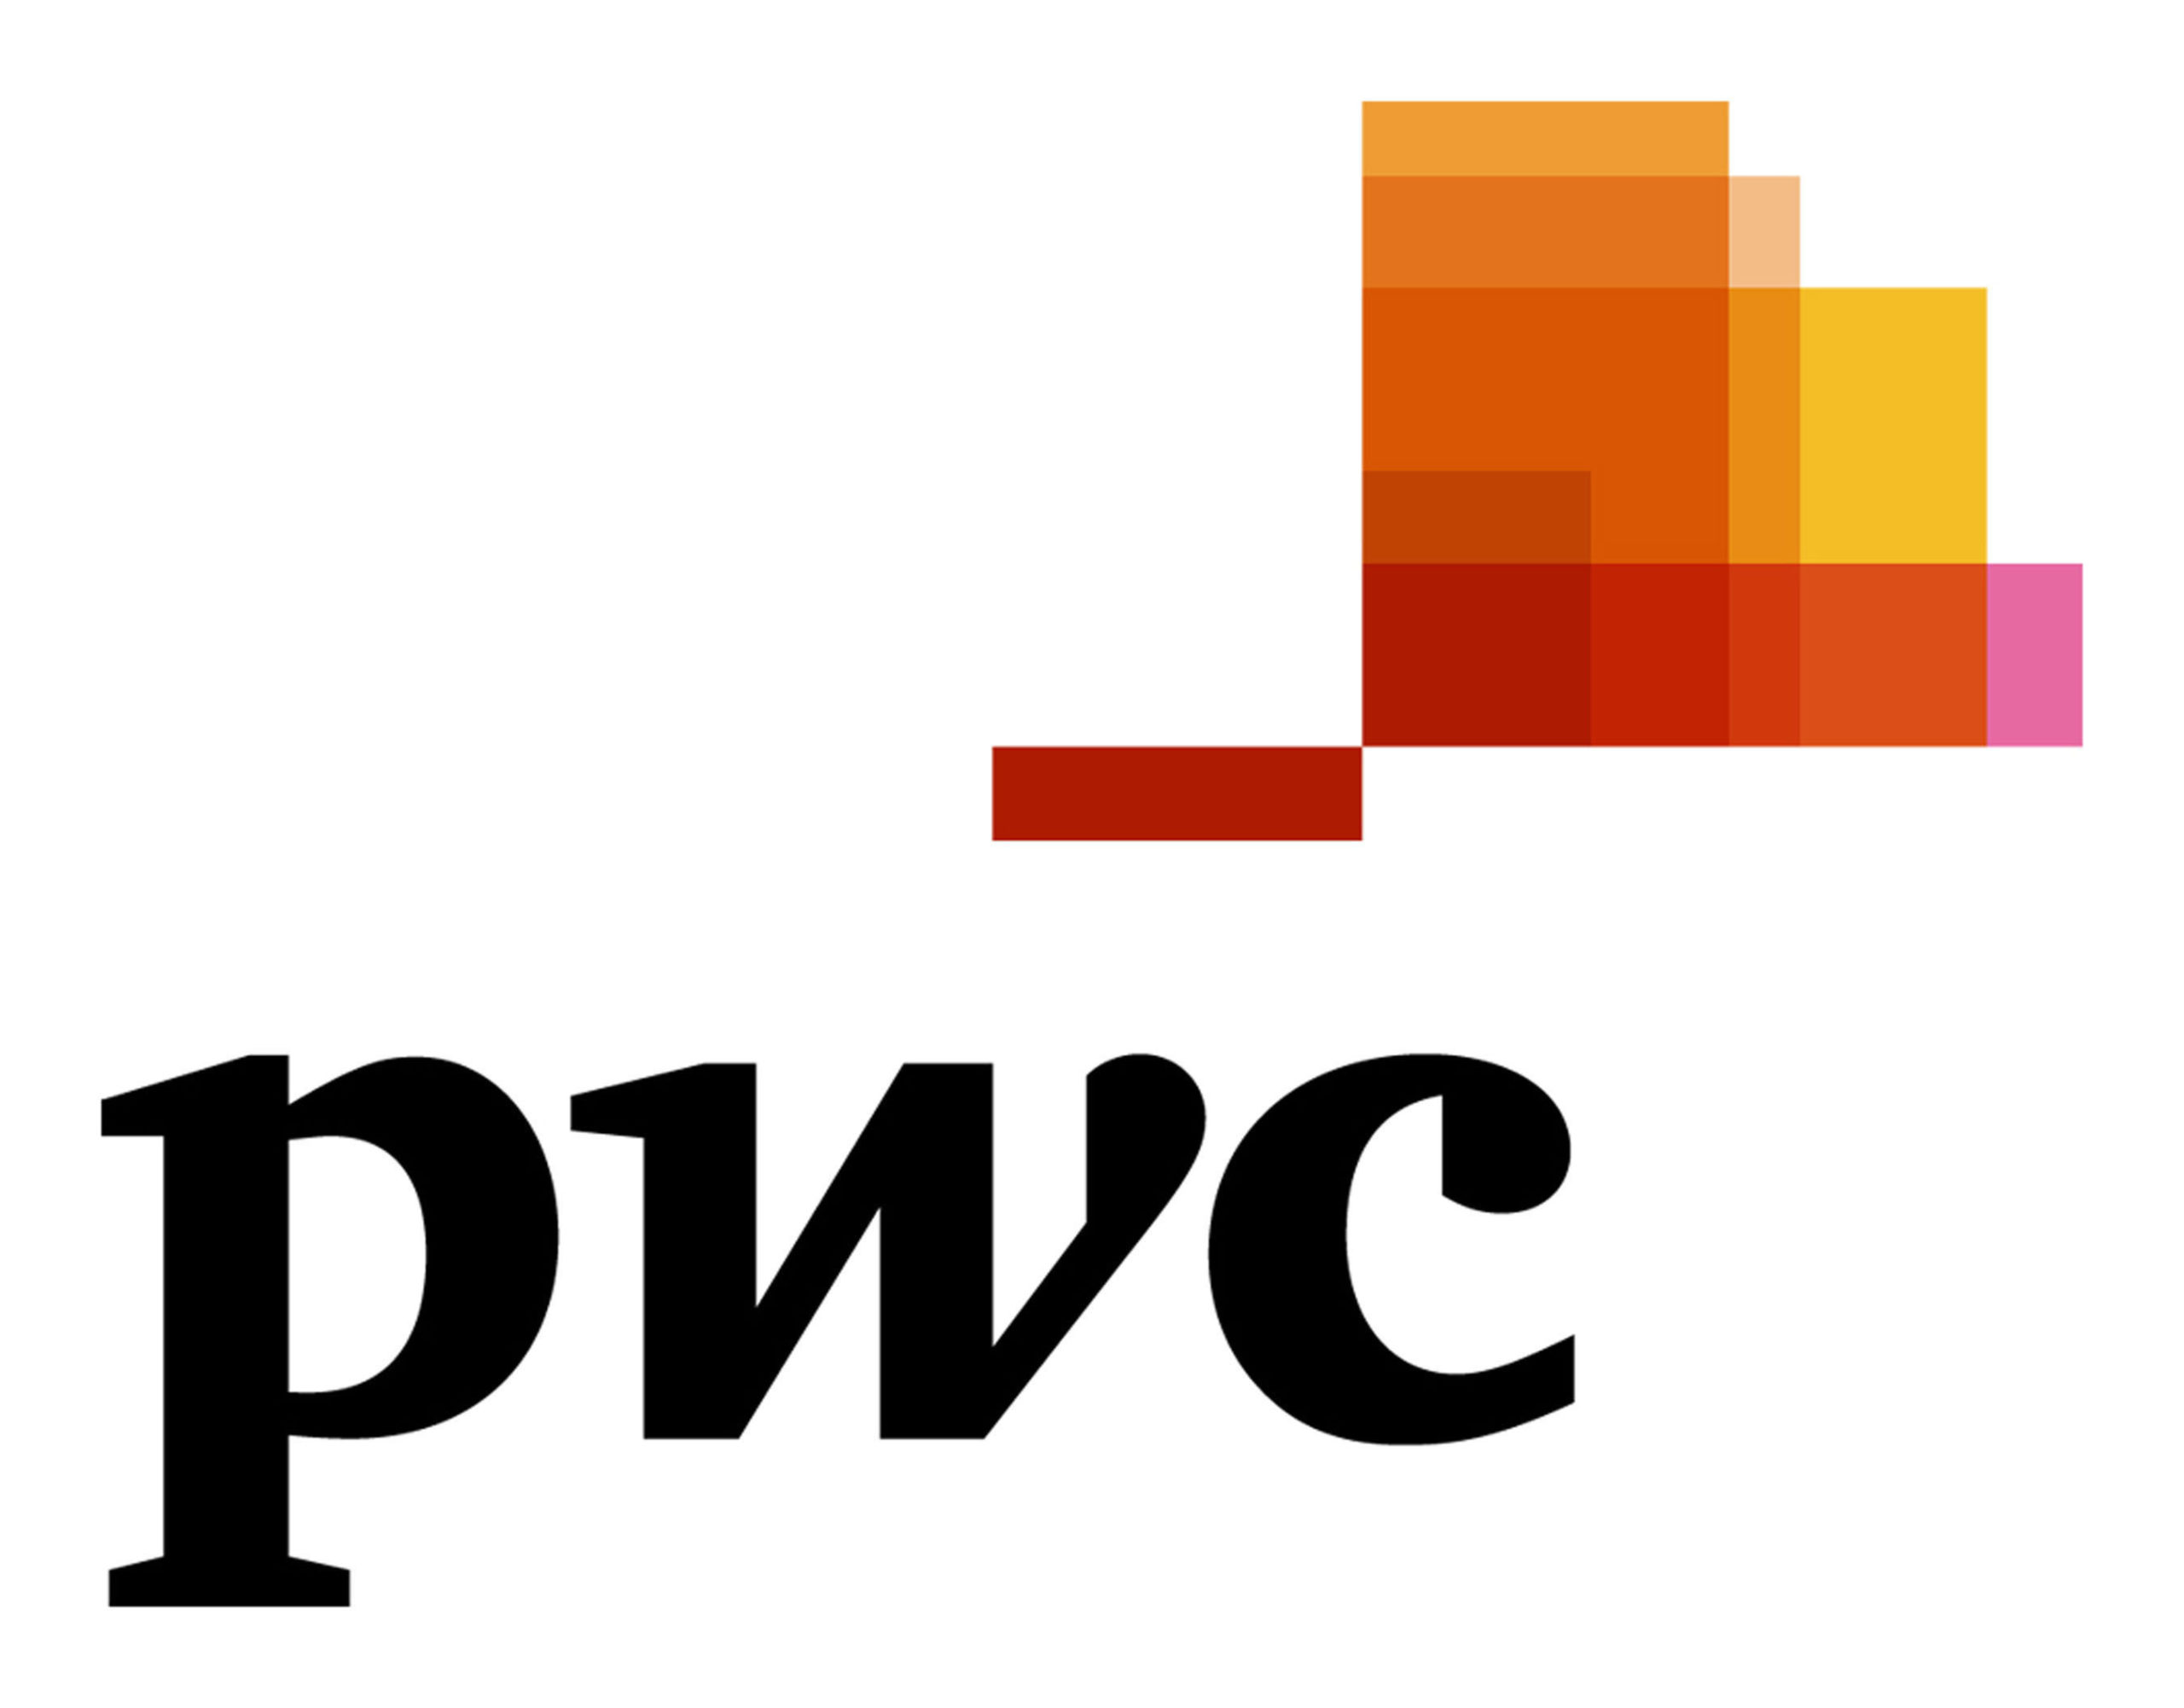 PwC Survey: Obtaining Finance, Finding customers, Infrastructure Deficit Top Challenges Of Nigerian MSMEs